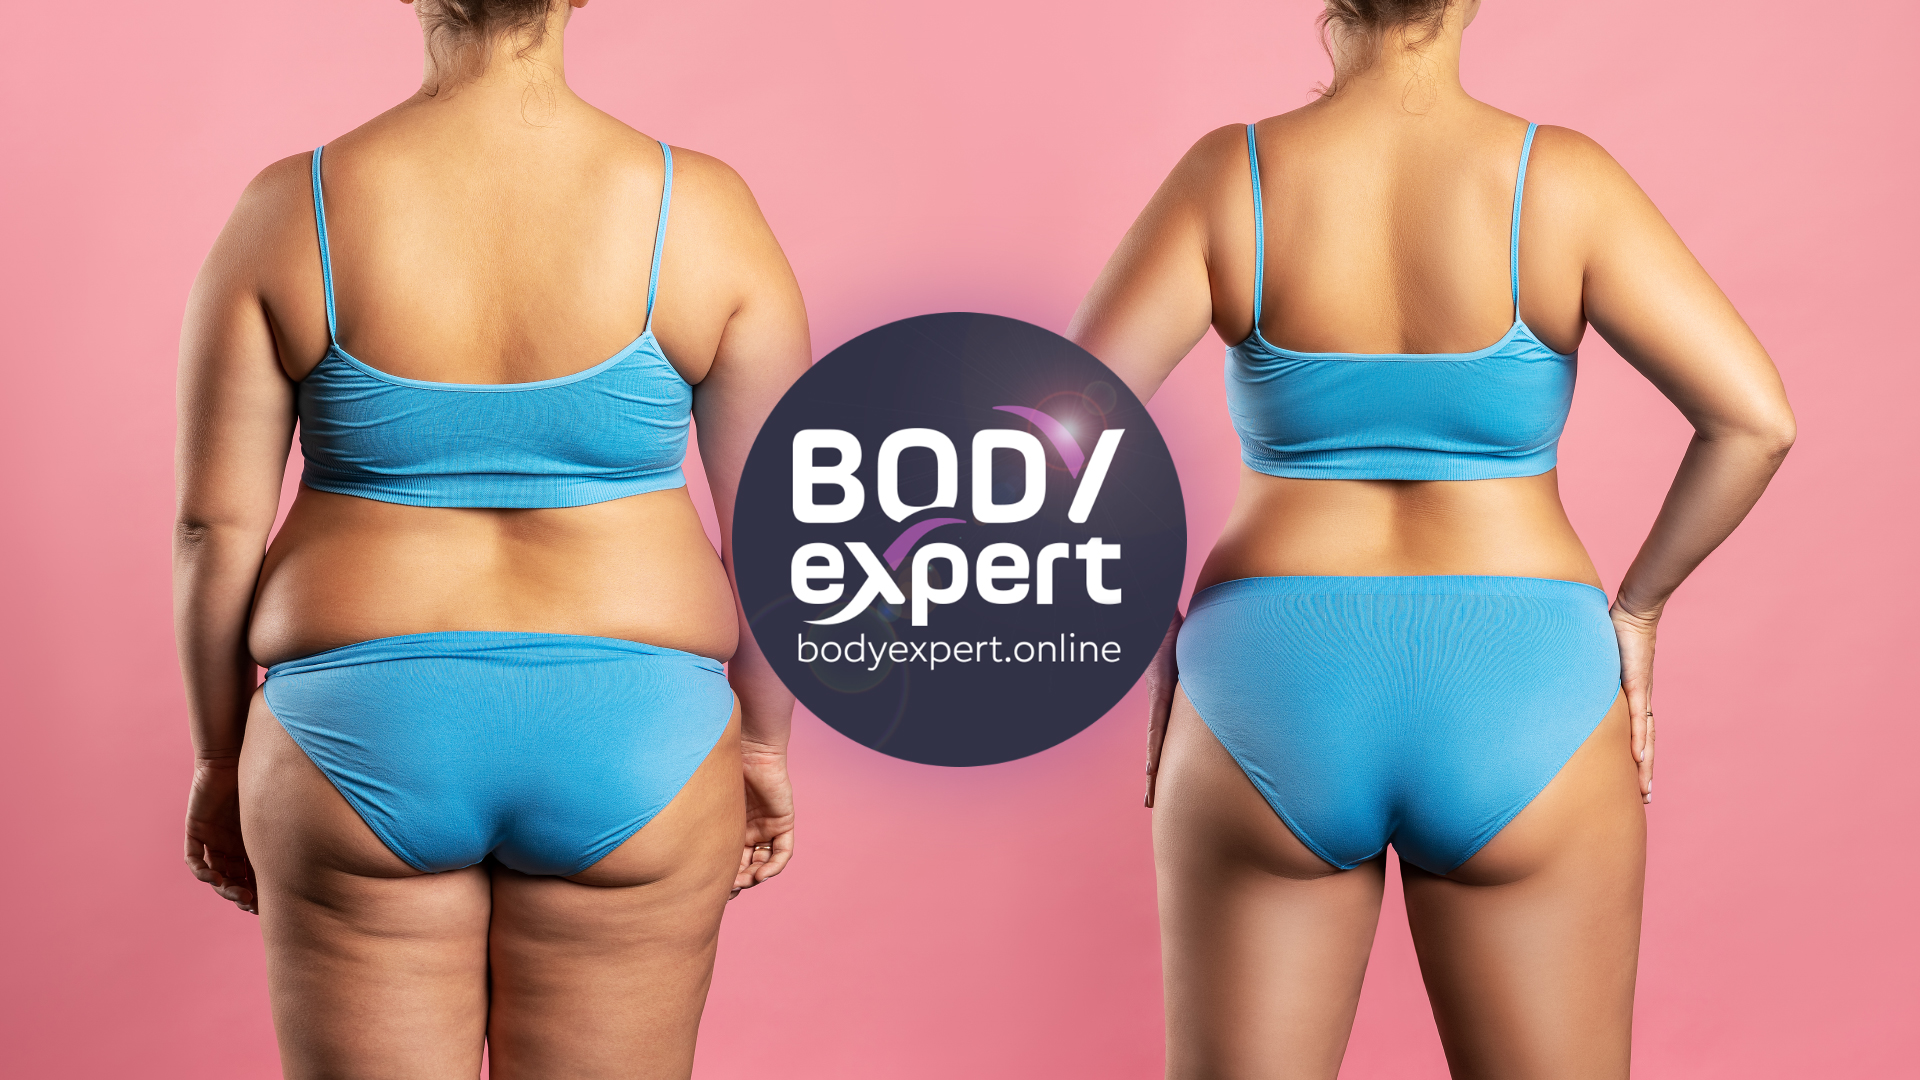 Love Handle Liposuction Cost Procedure Before And After